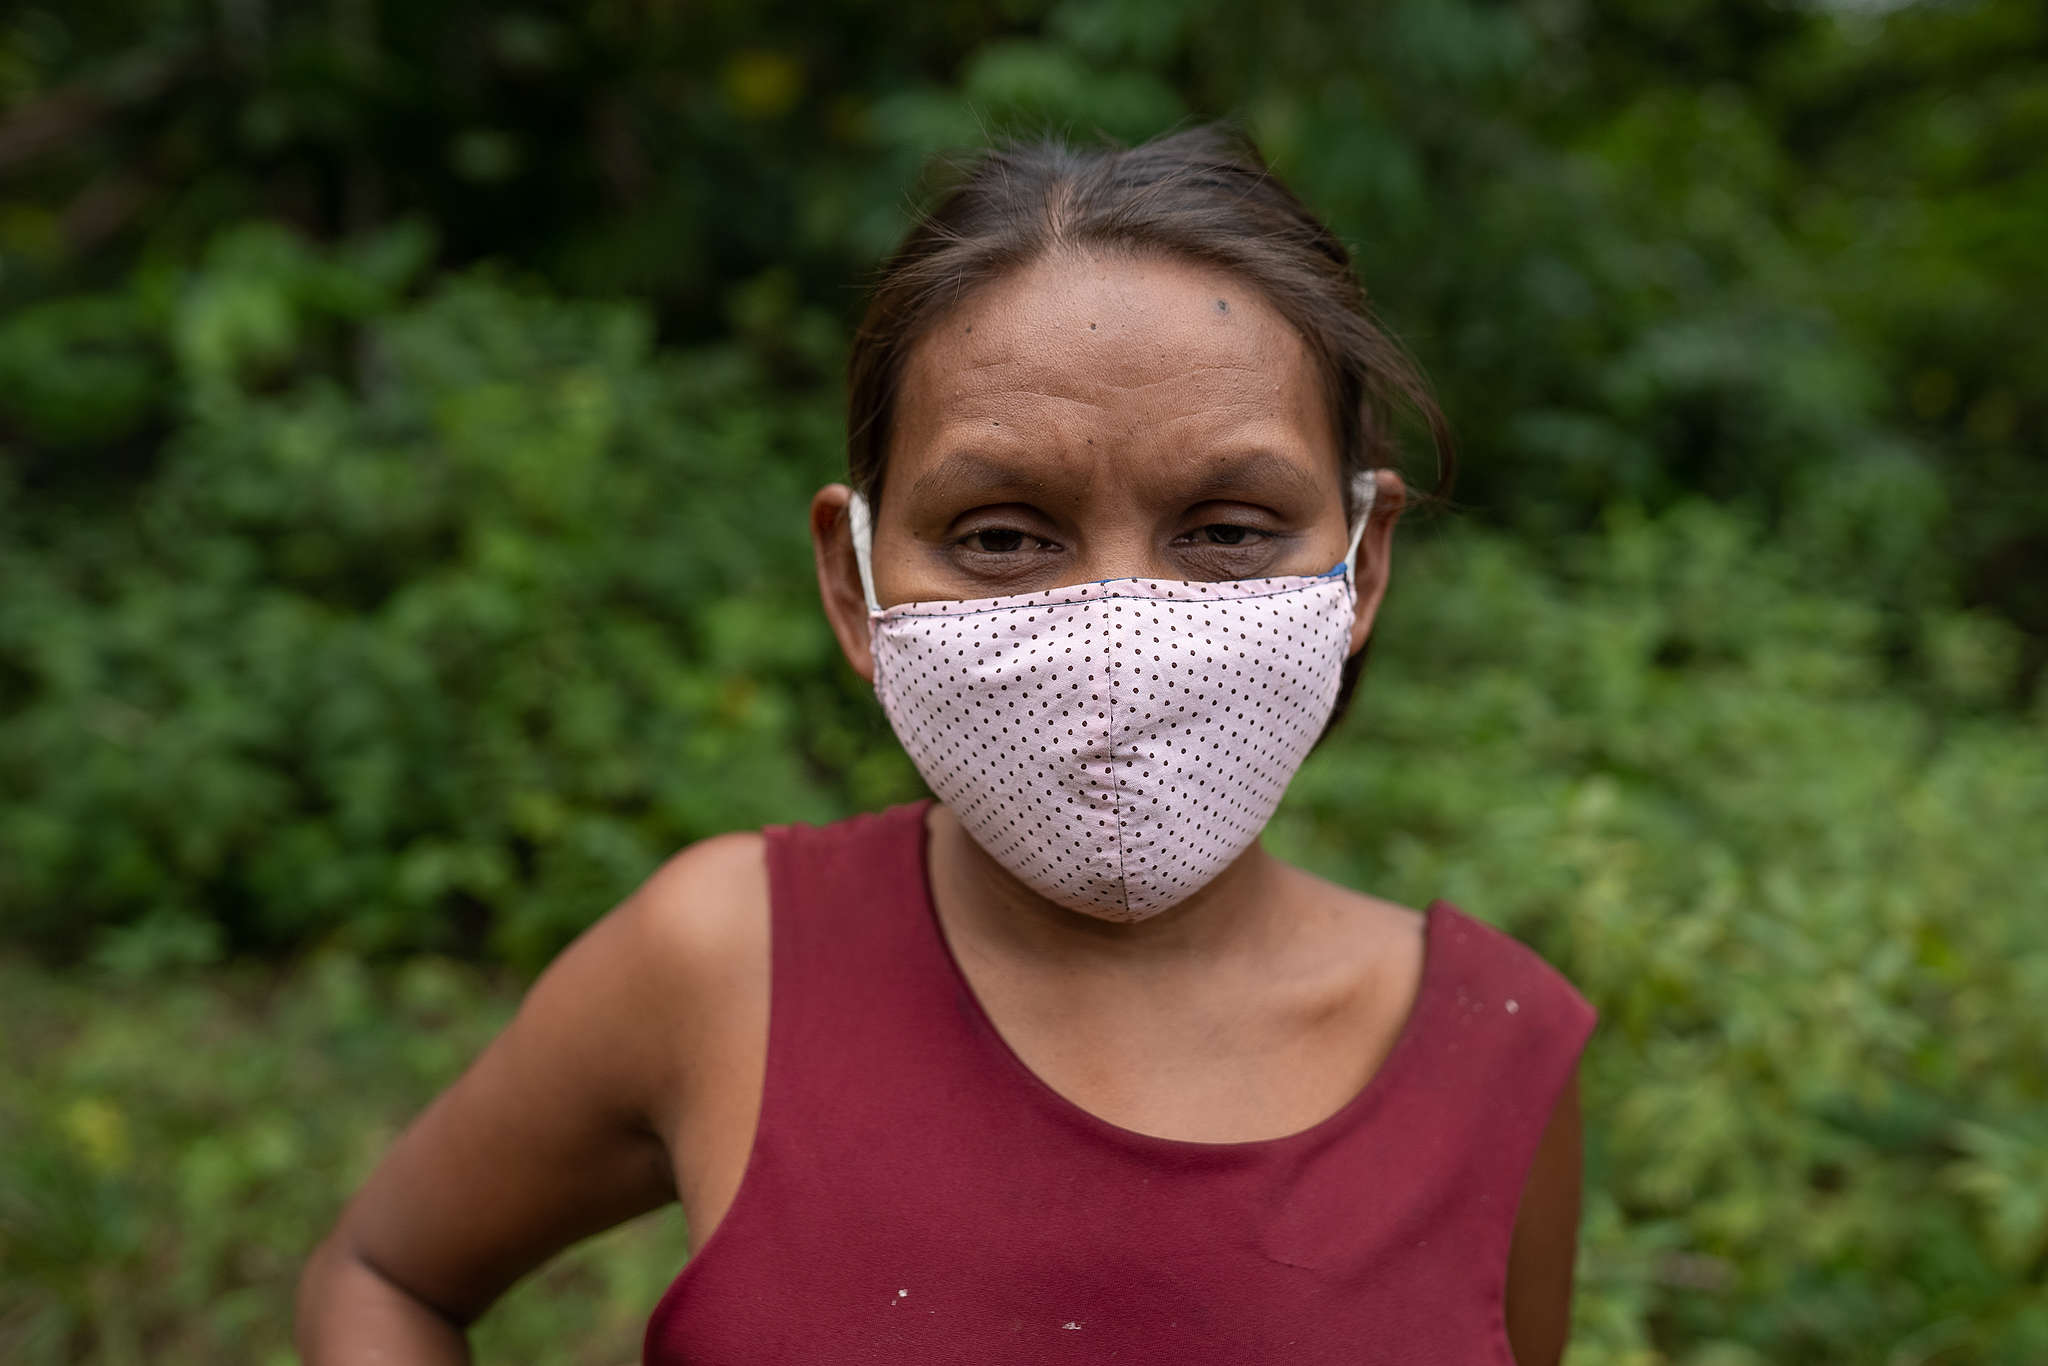 Women from the Dâw People wear masks to protect from COVID-19. © Christian Braga / Greenpeace